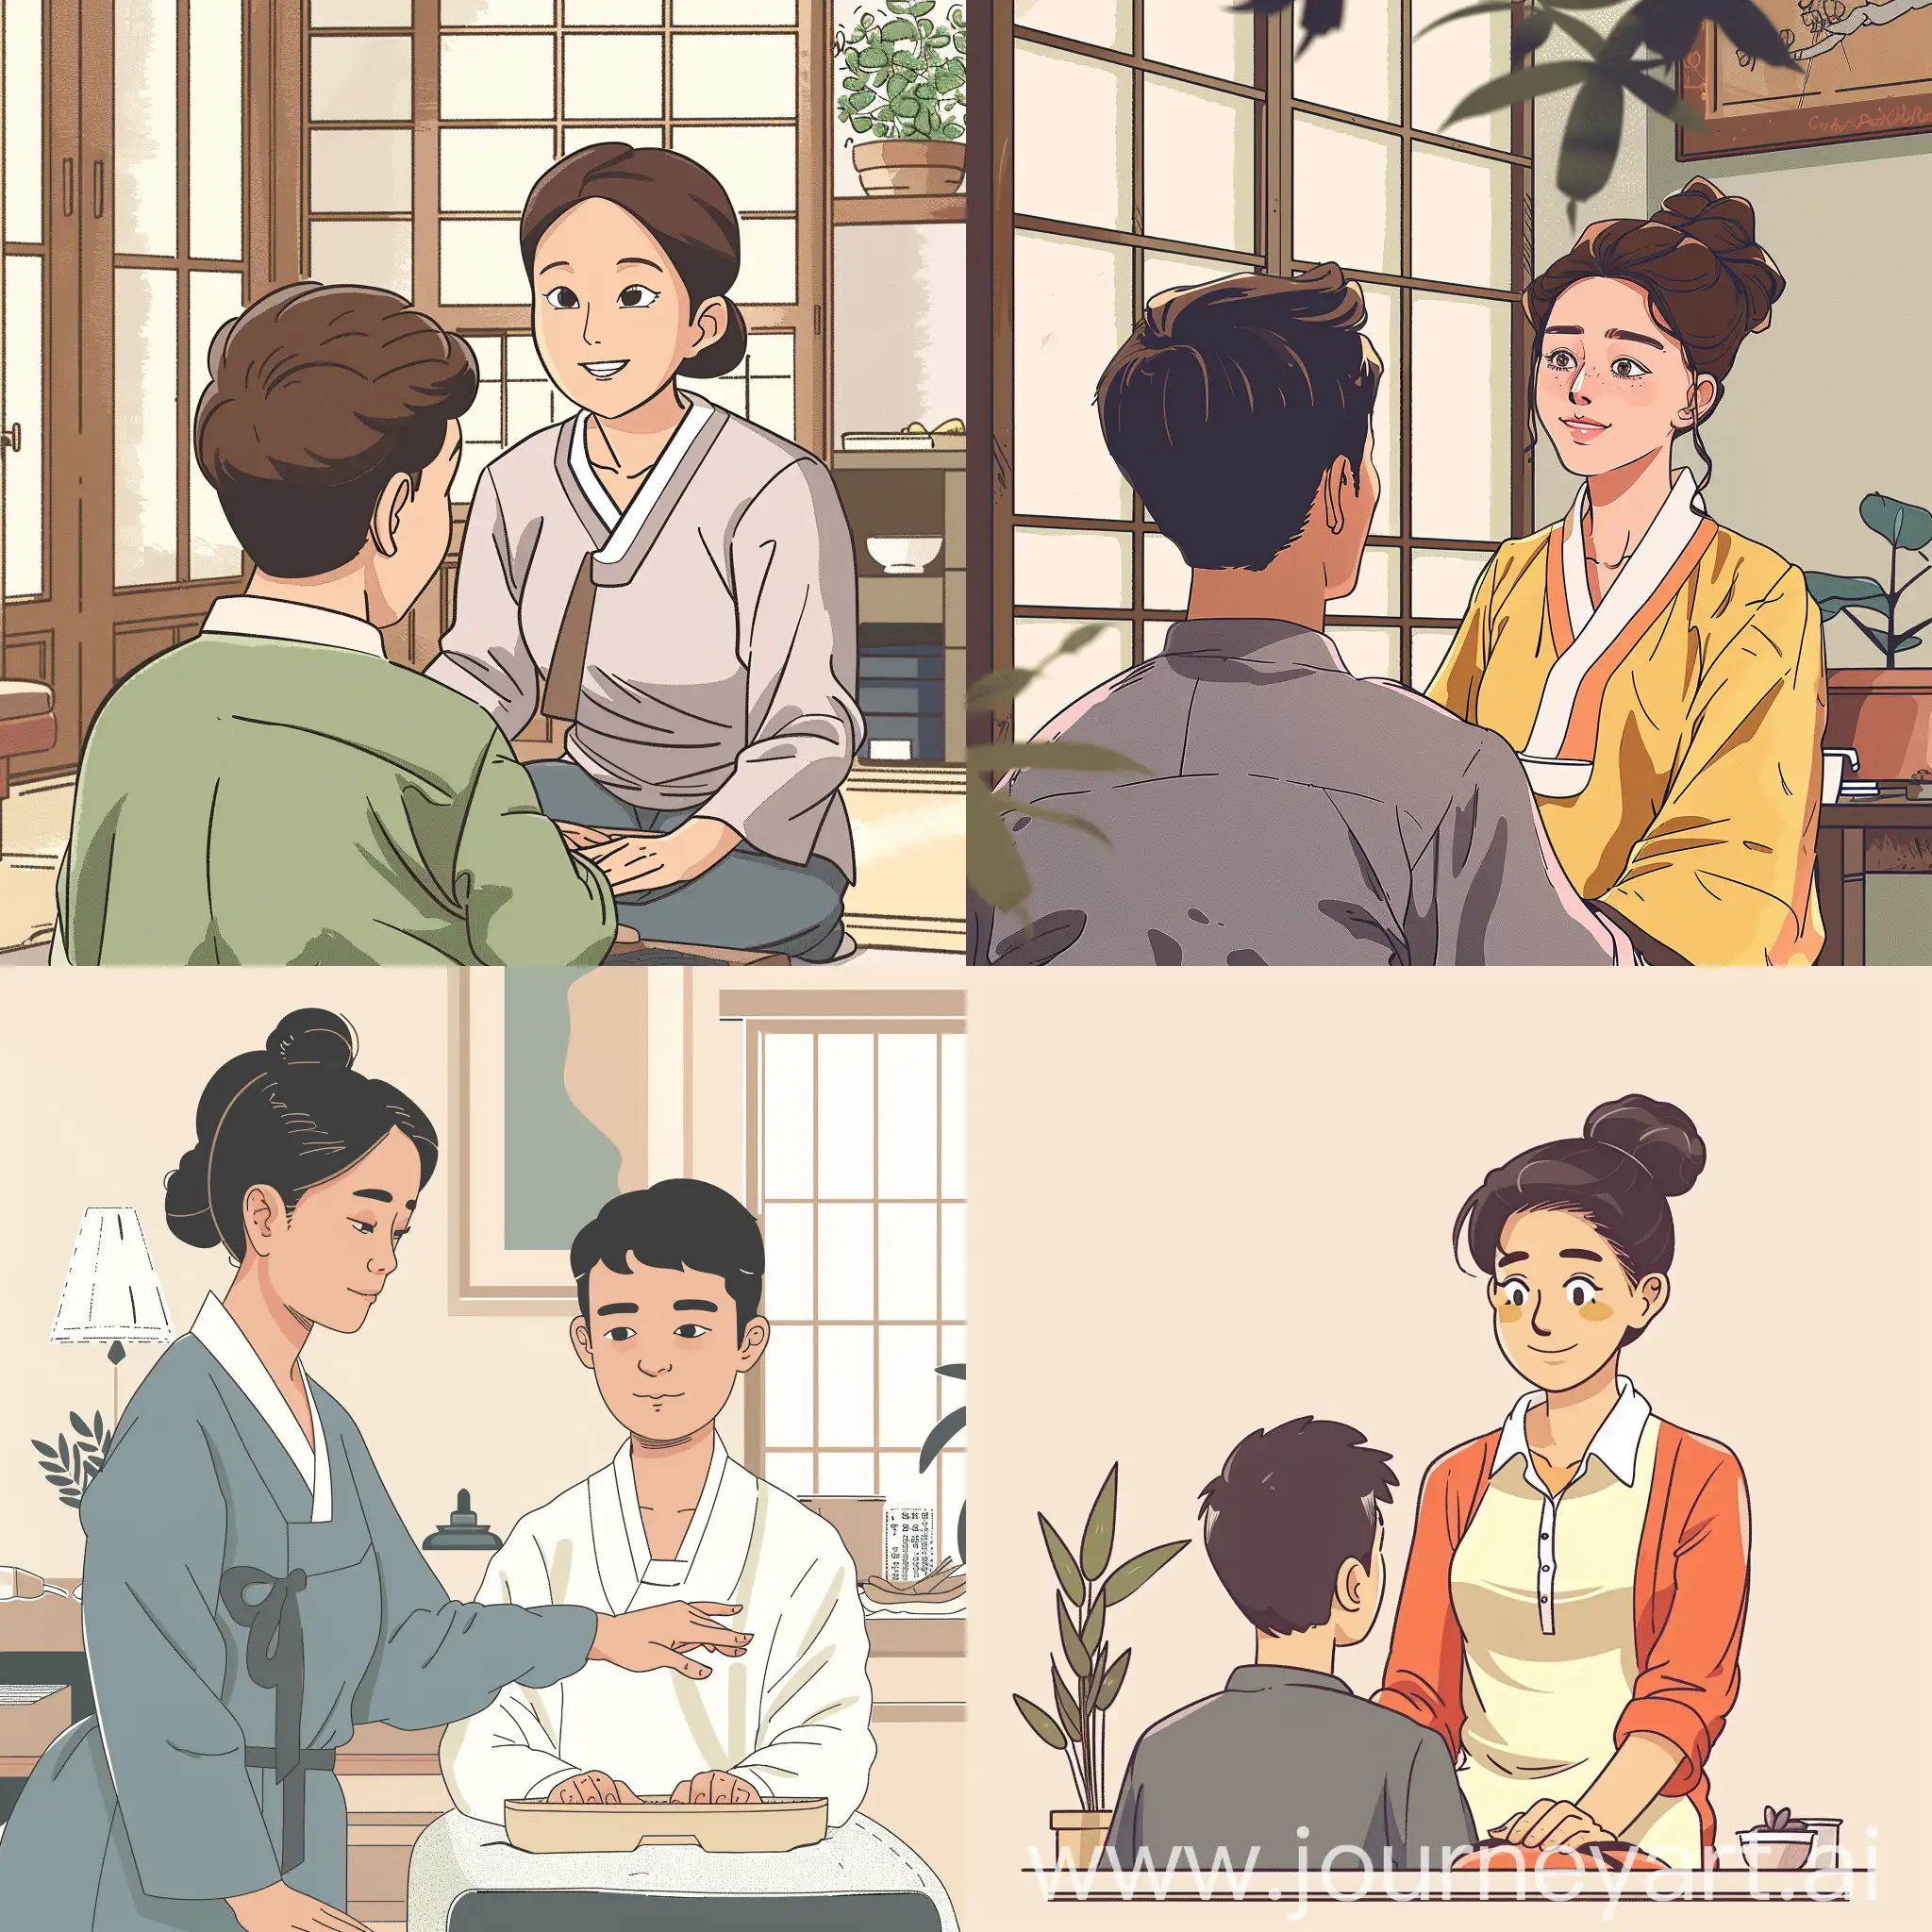  A Korean woman is telling a young man about the techniques of massage, illustrated in cartoon comics 